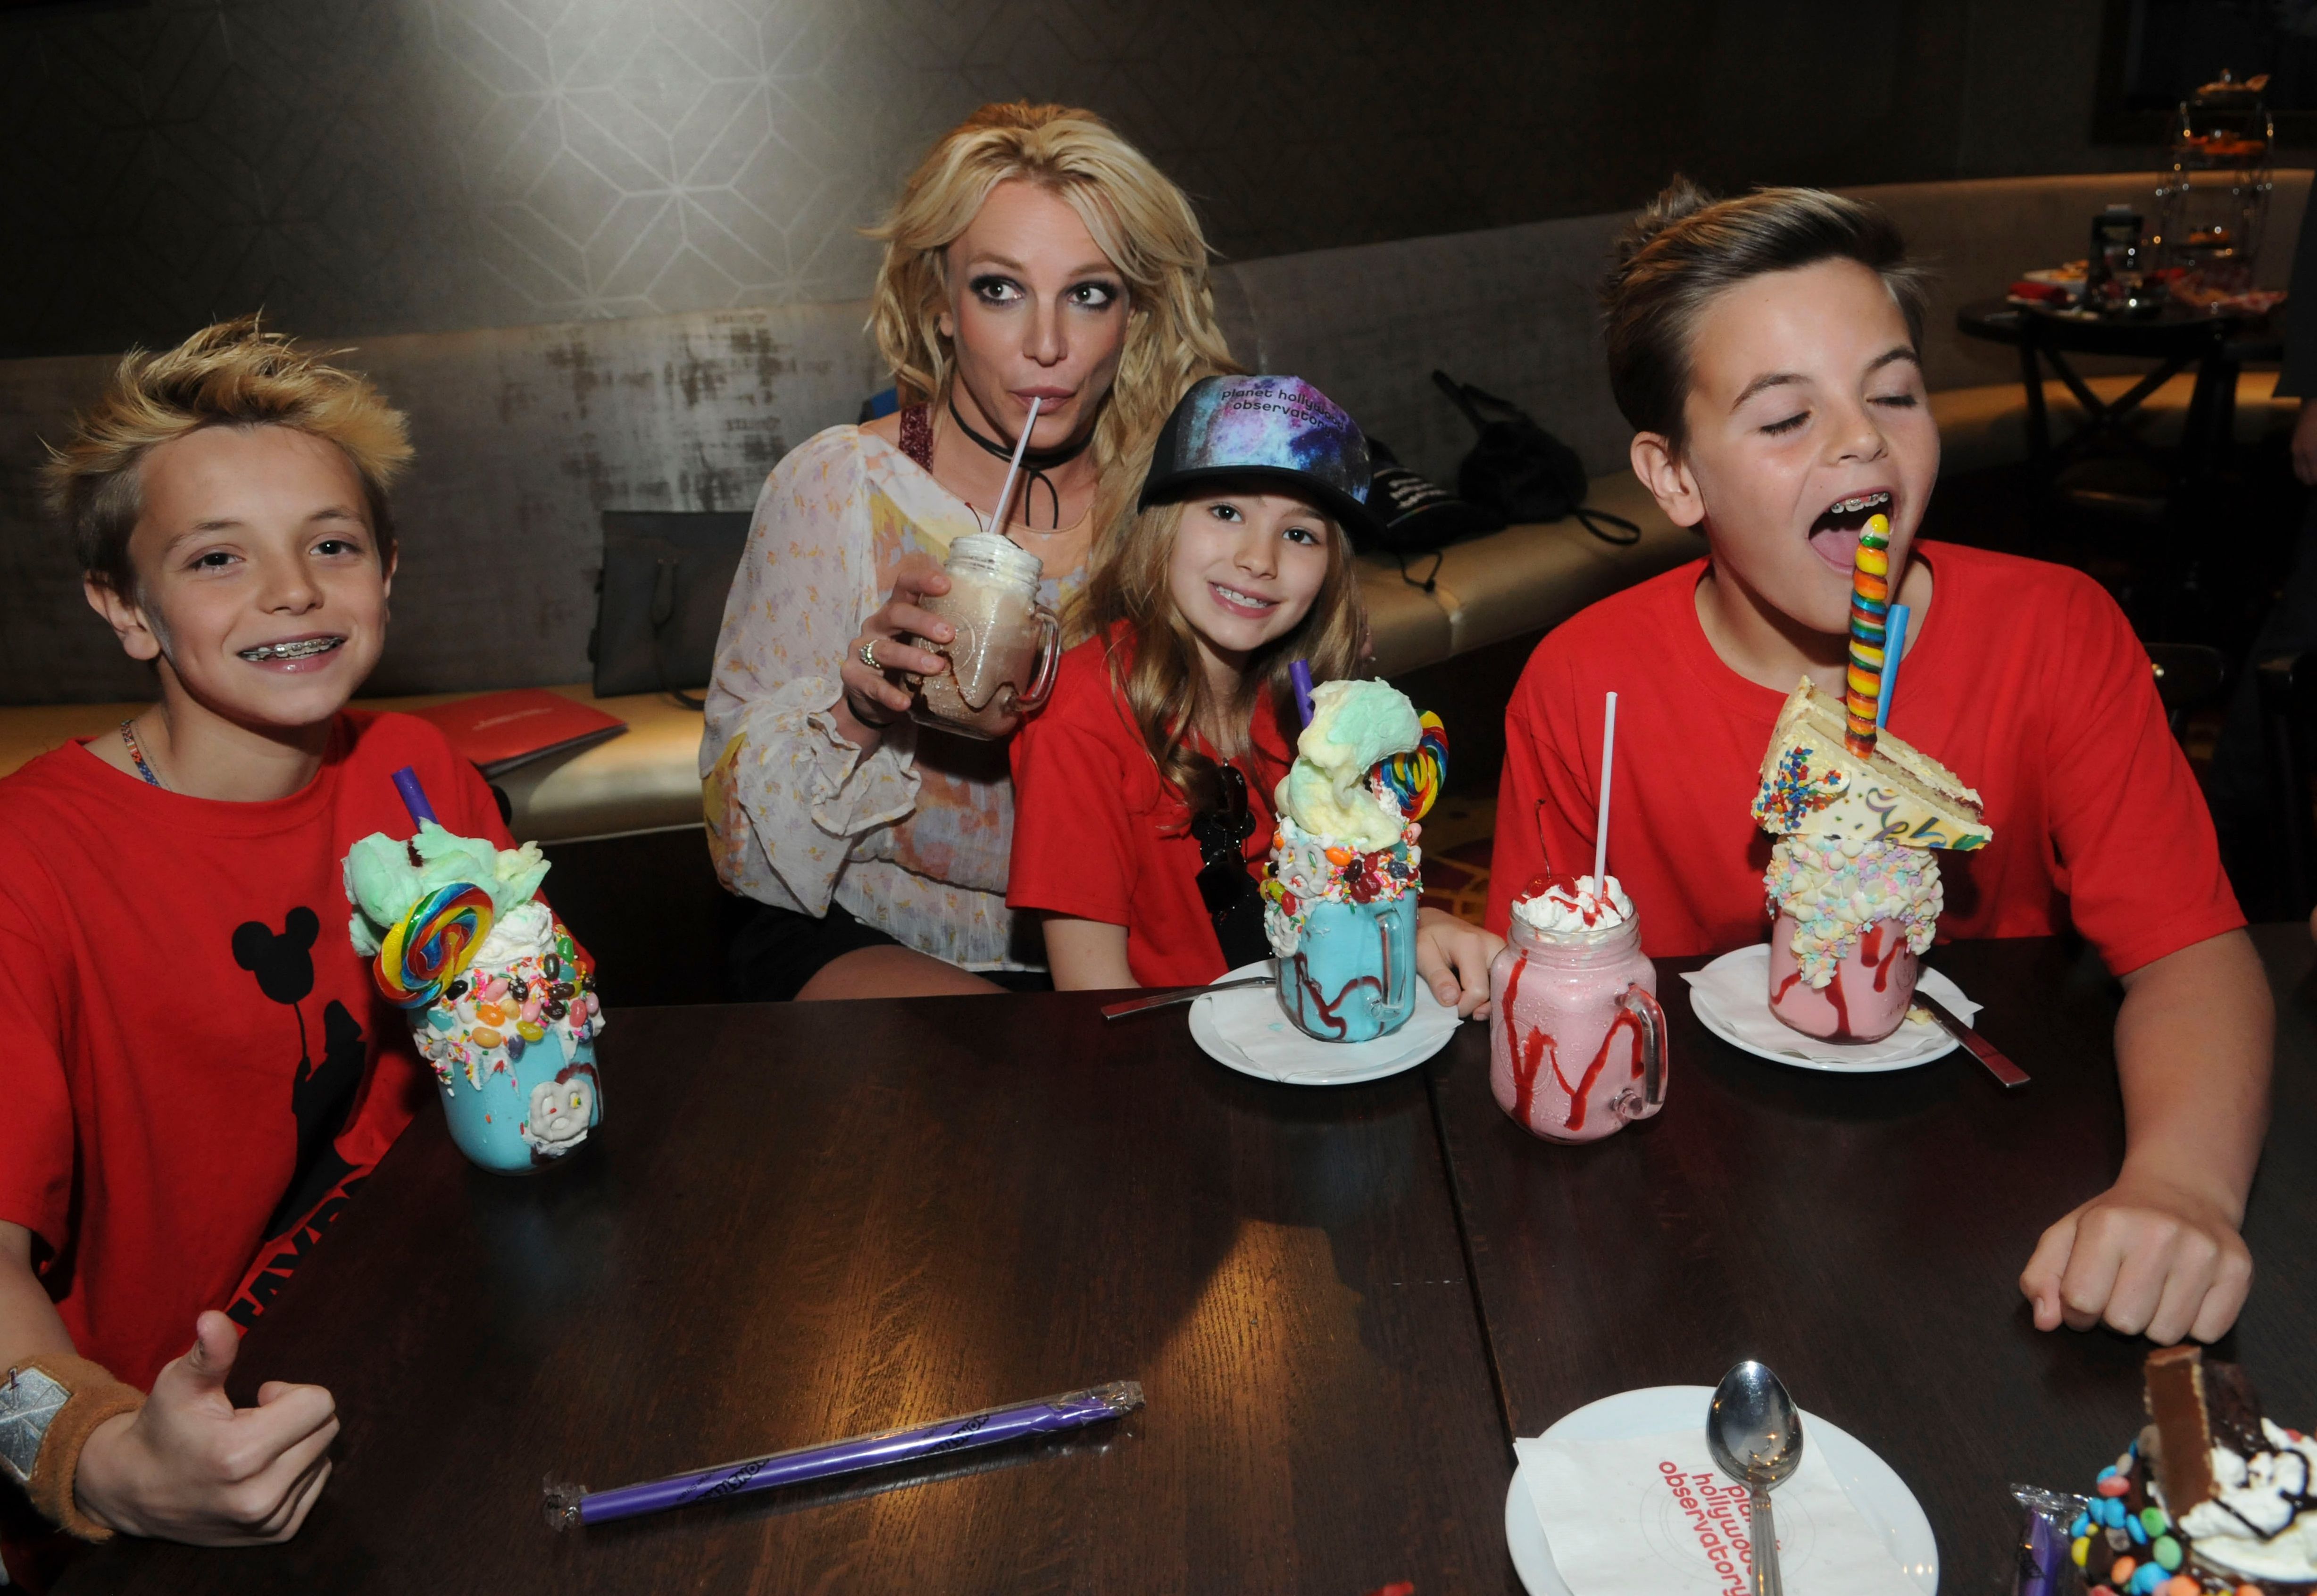  Britney Spears with sons Jayden and Sean Federline and niece Maddie Aldridge at Planet Hollywood in Orlando, Florida in 2017 | Source: Getty Images